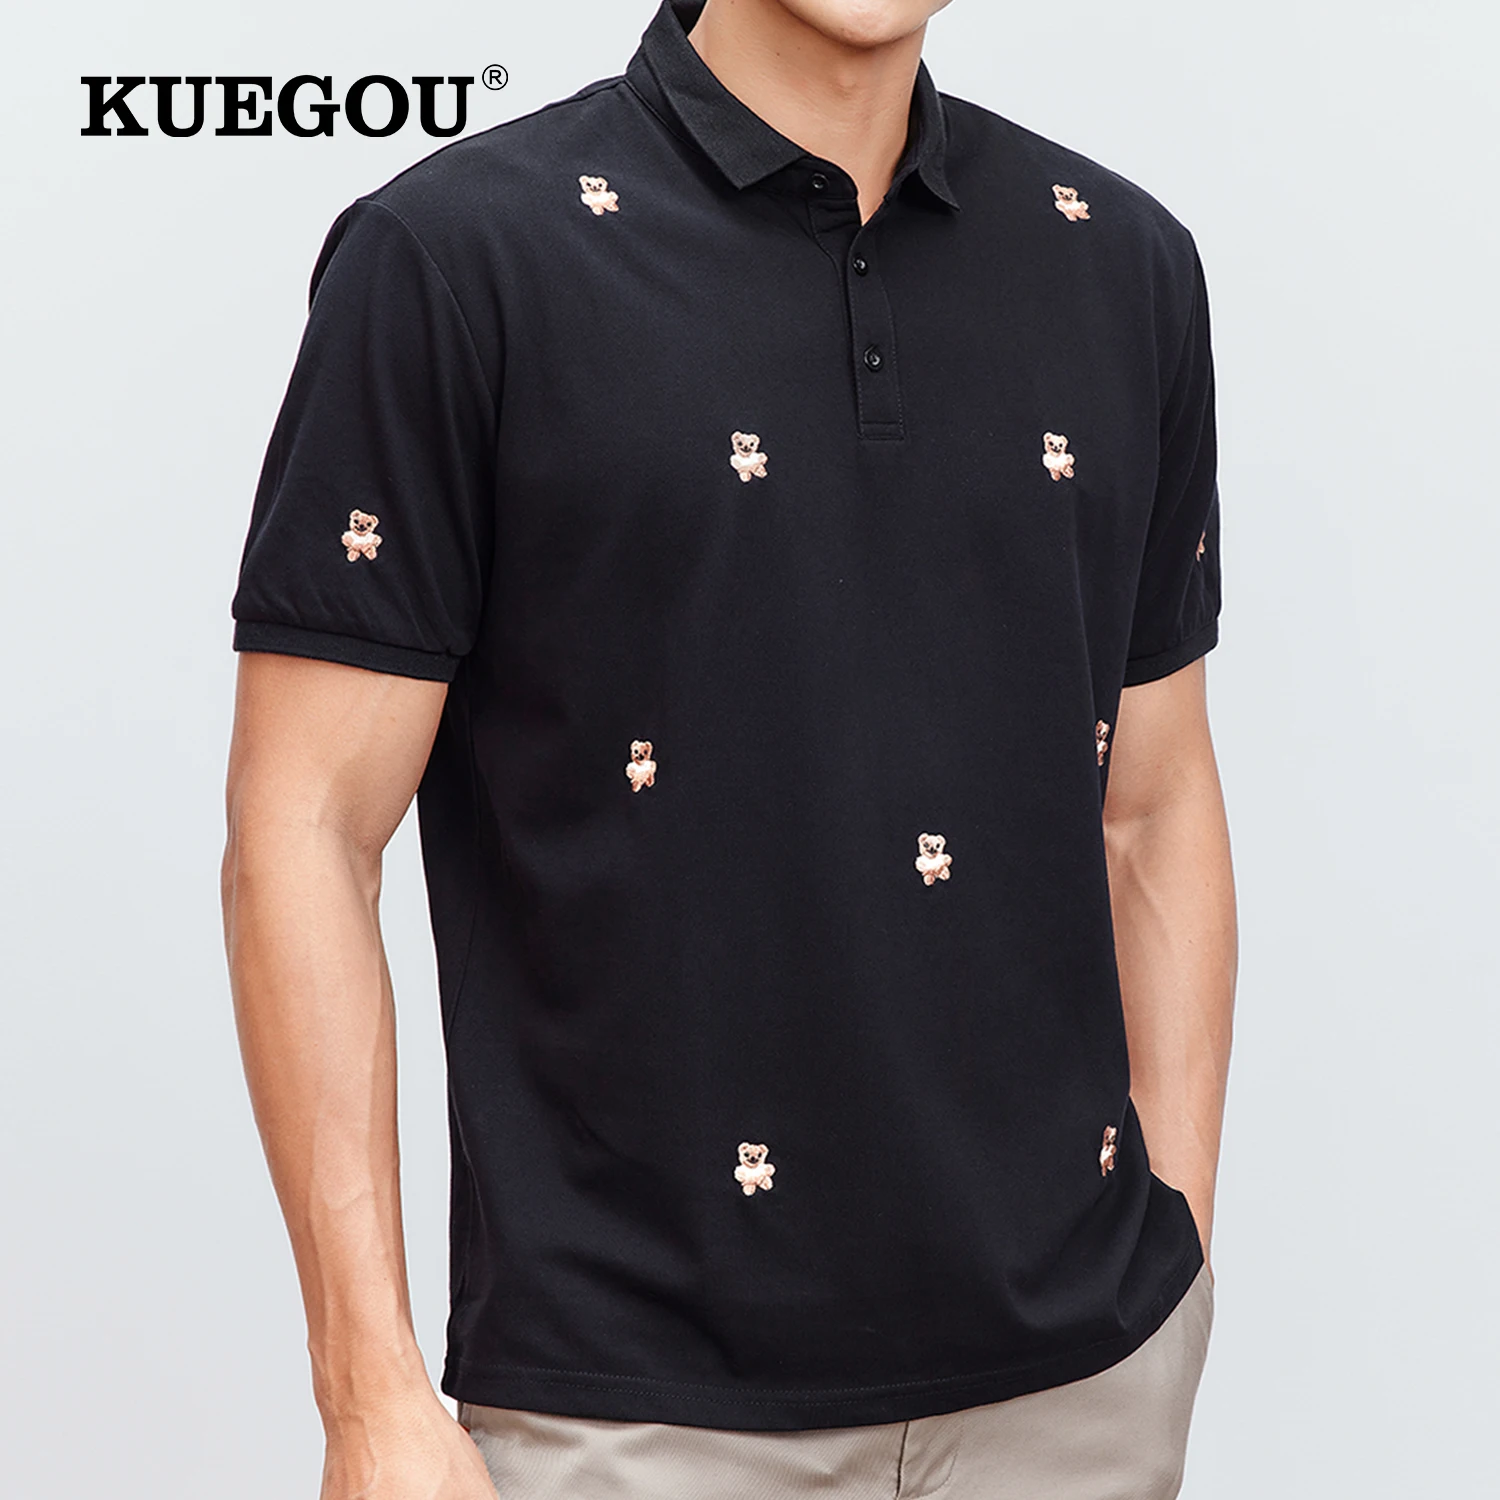 

KUEGOU 2022 Summer New Men Polo Shirt Short Sleeves Teddy Bear Embroidery Fashion High Quality Apricot Top Plus Size AT-7370